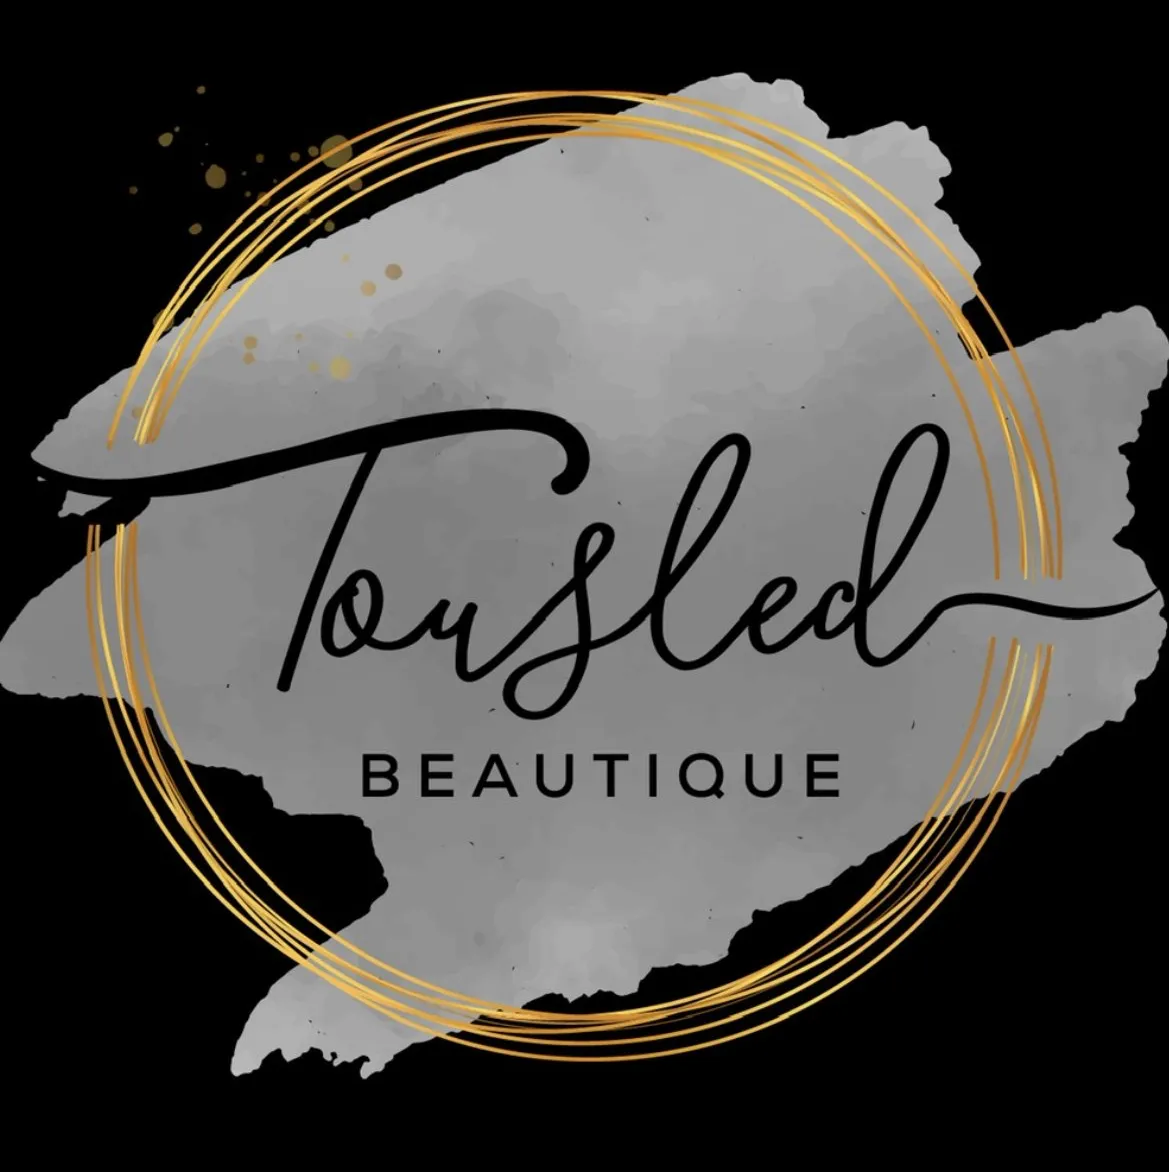 A logo for a beauty salon called twisted beautique